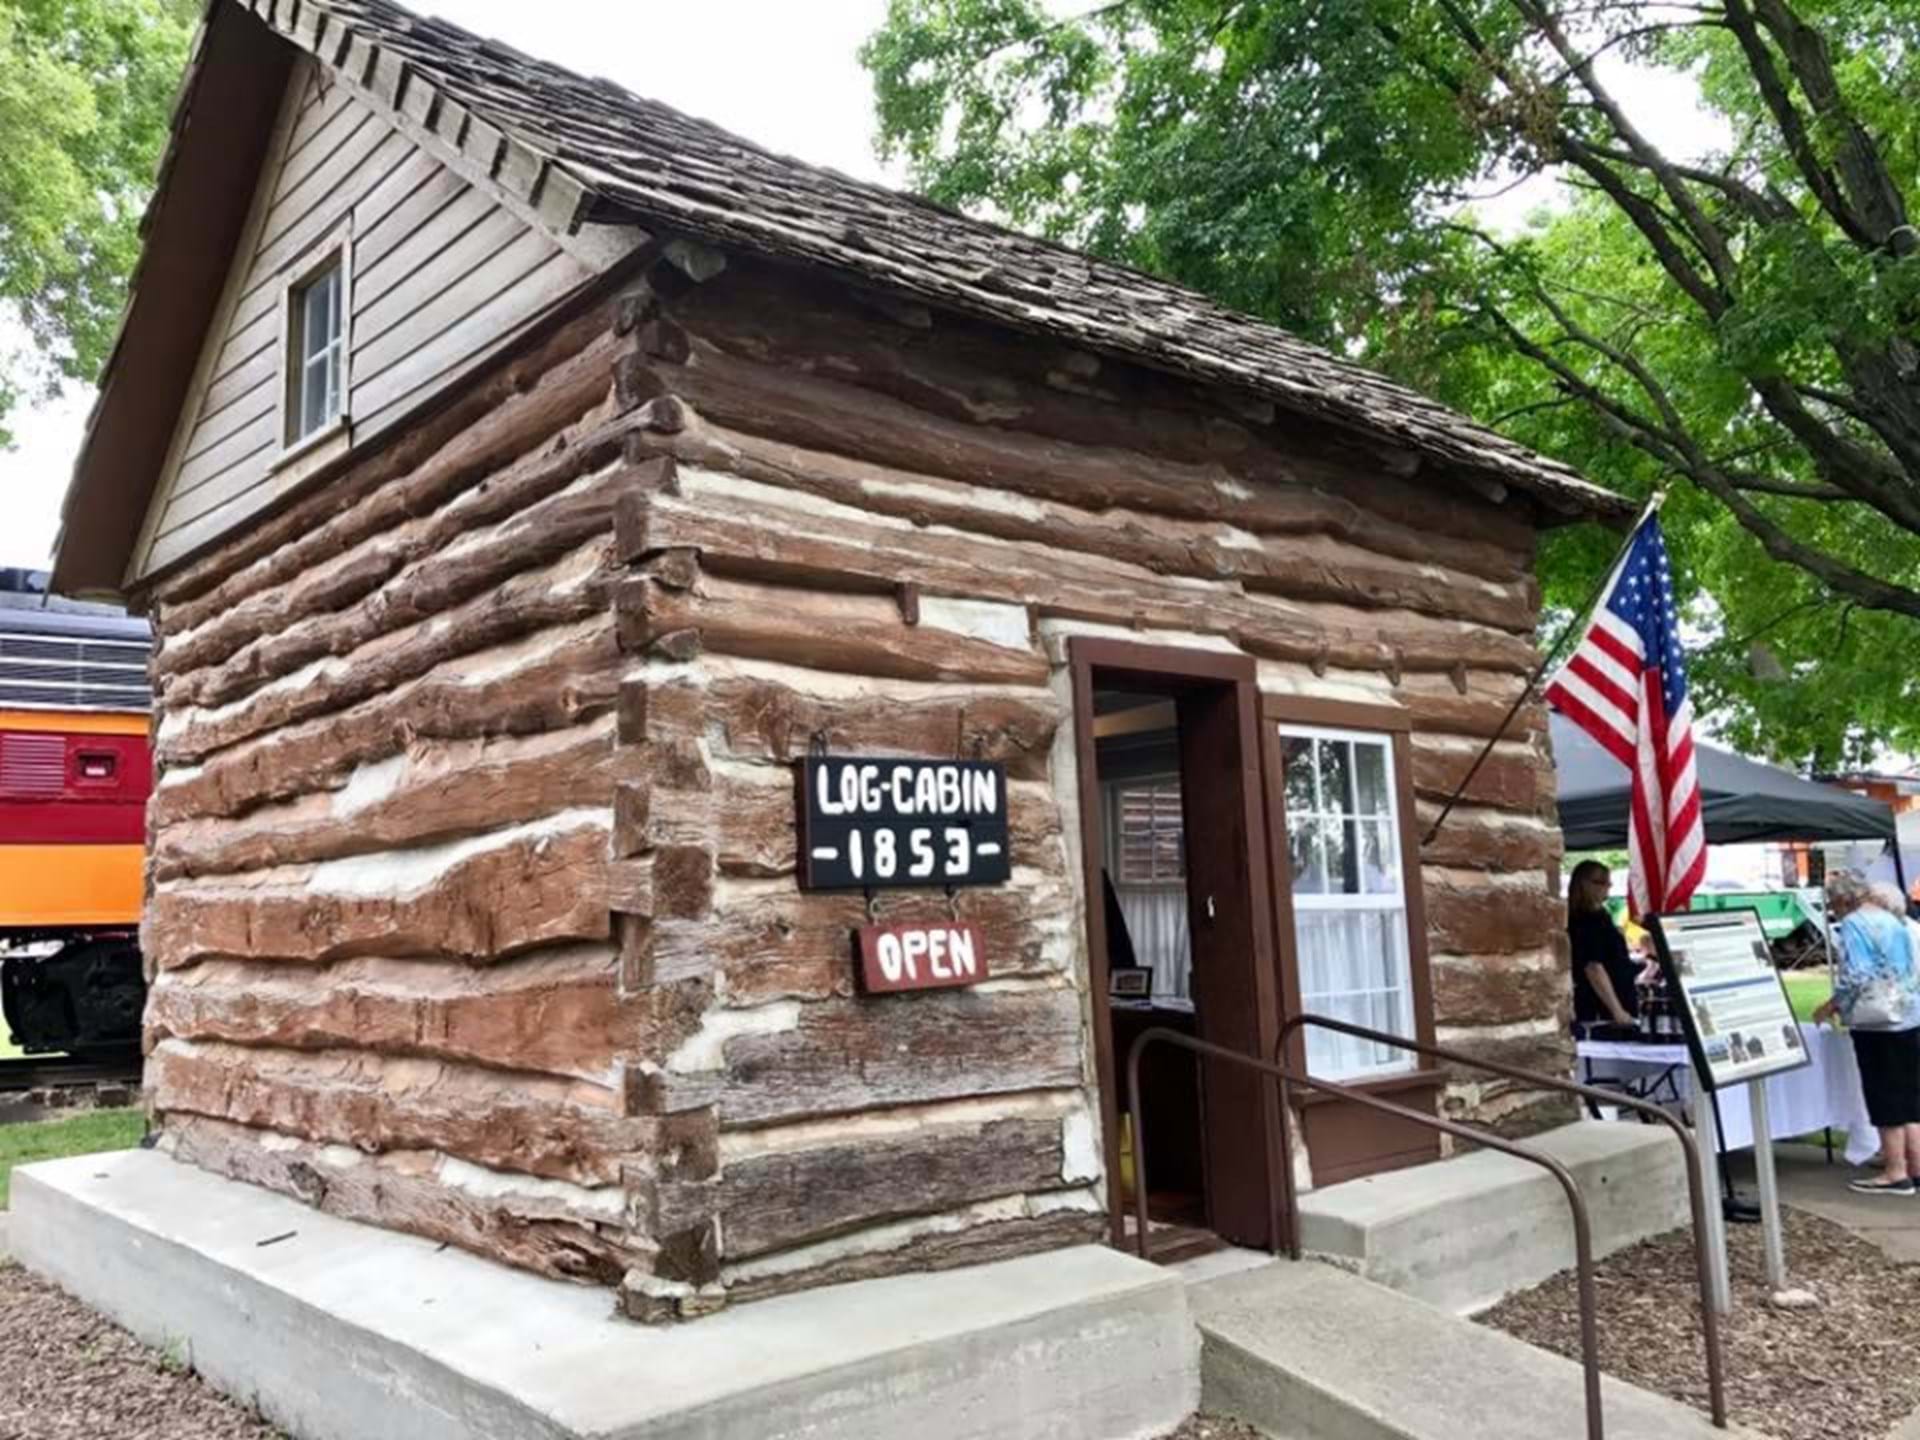 At one time, two families lived in this two room cabin.